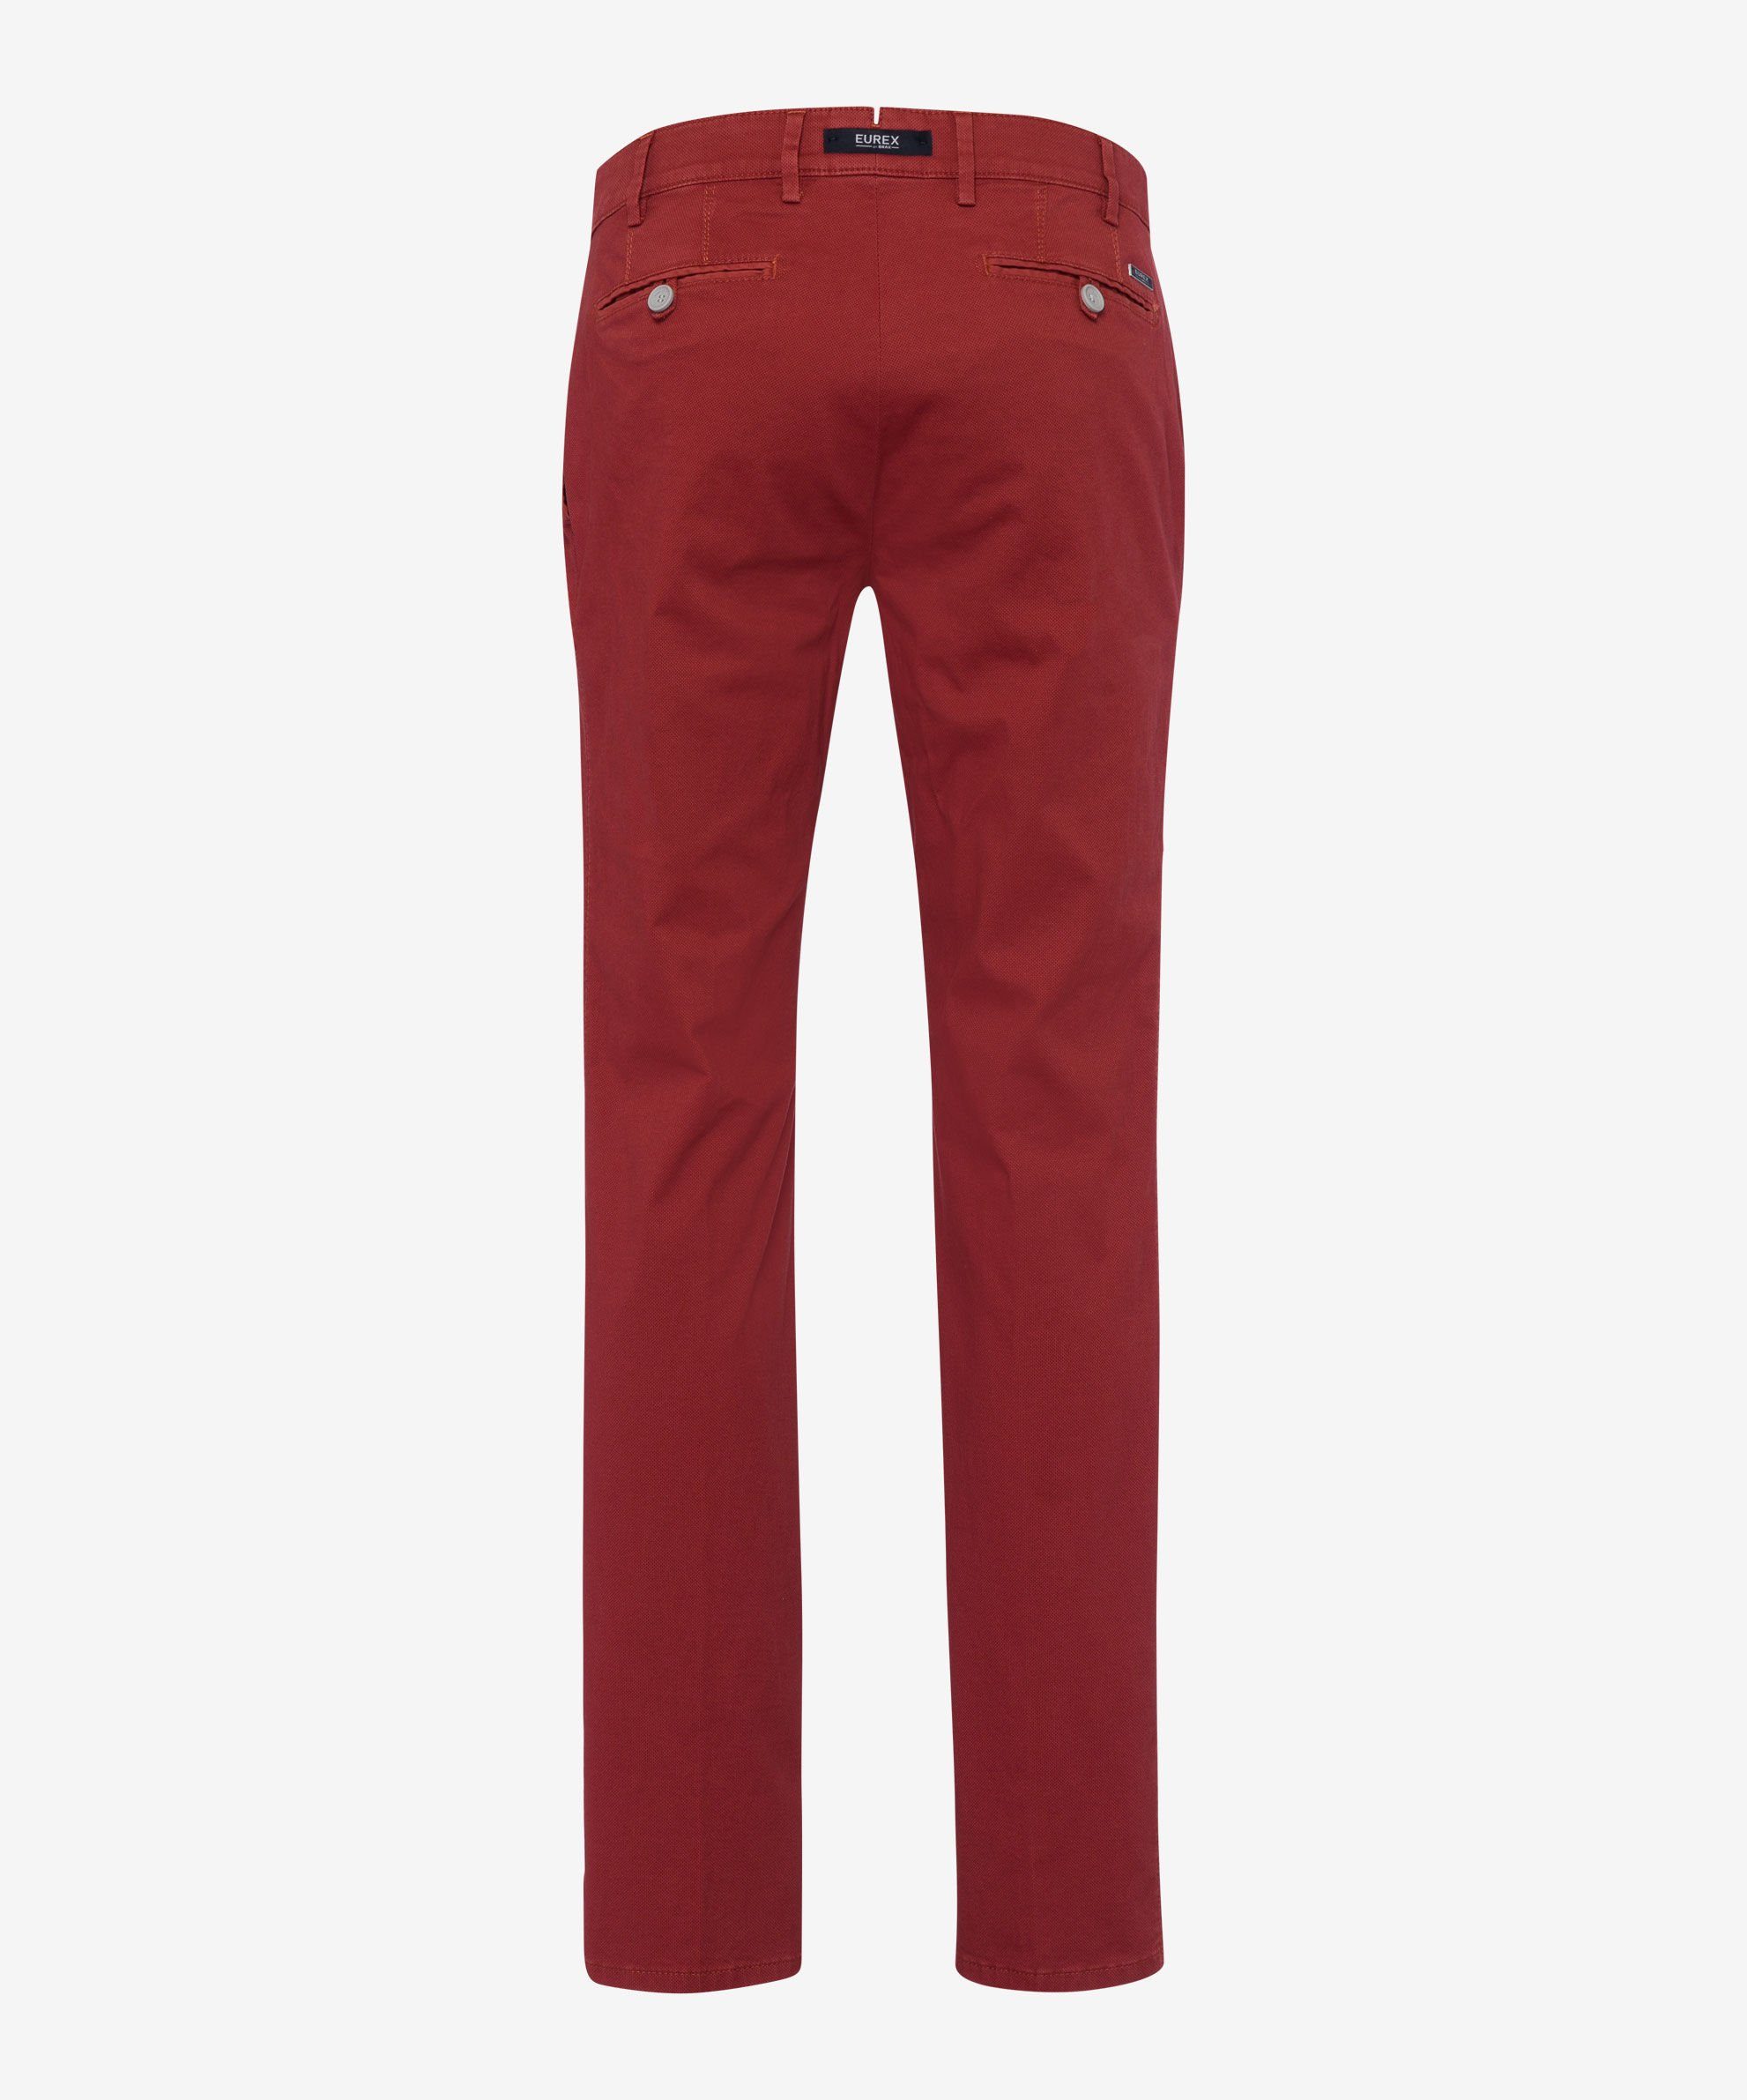 bordeaux Chinohose BRAX EUREX by